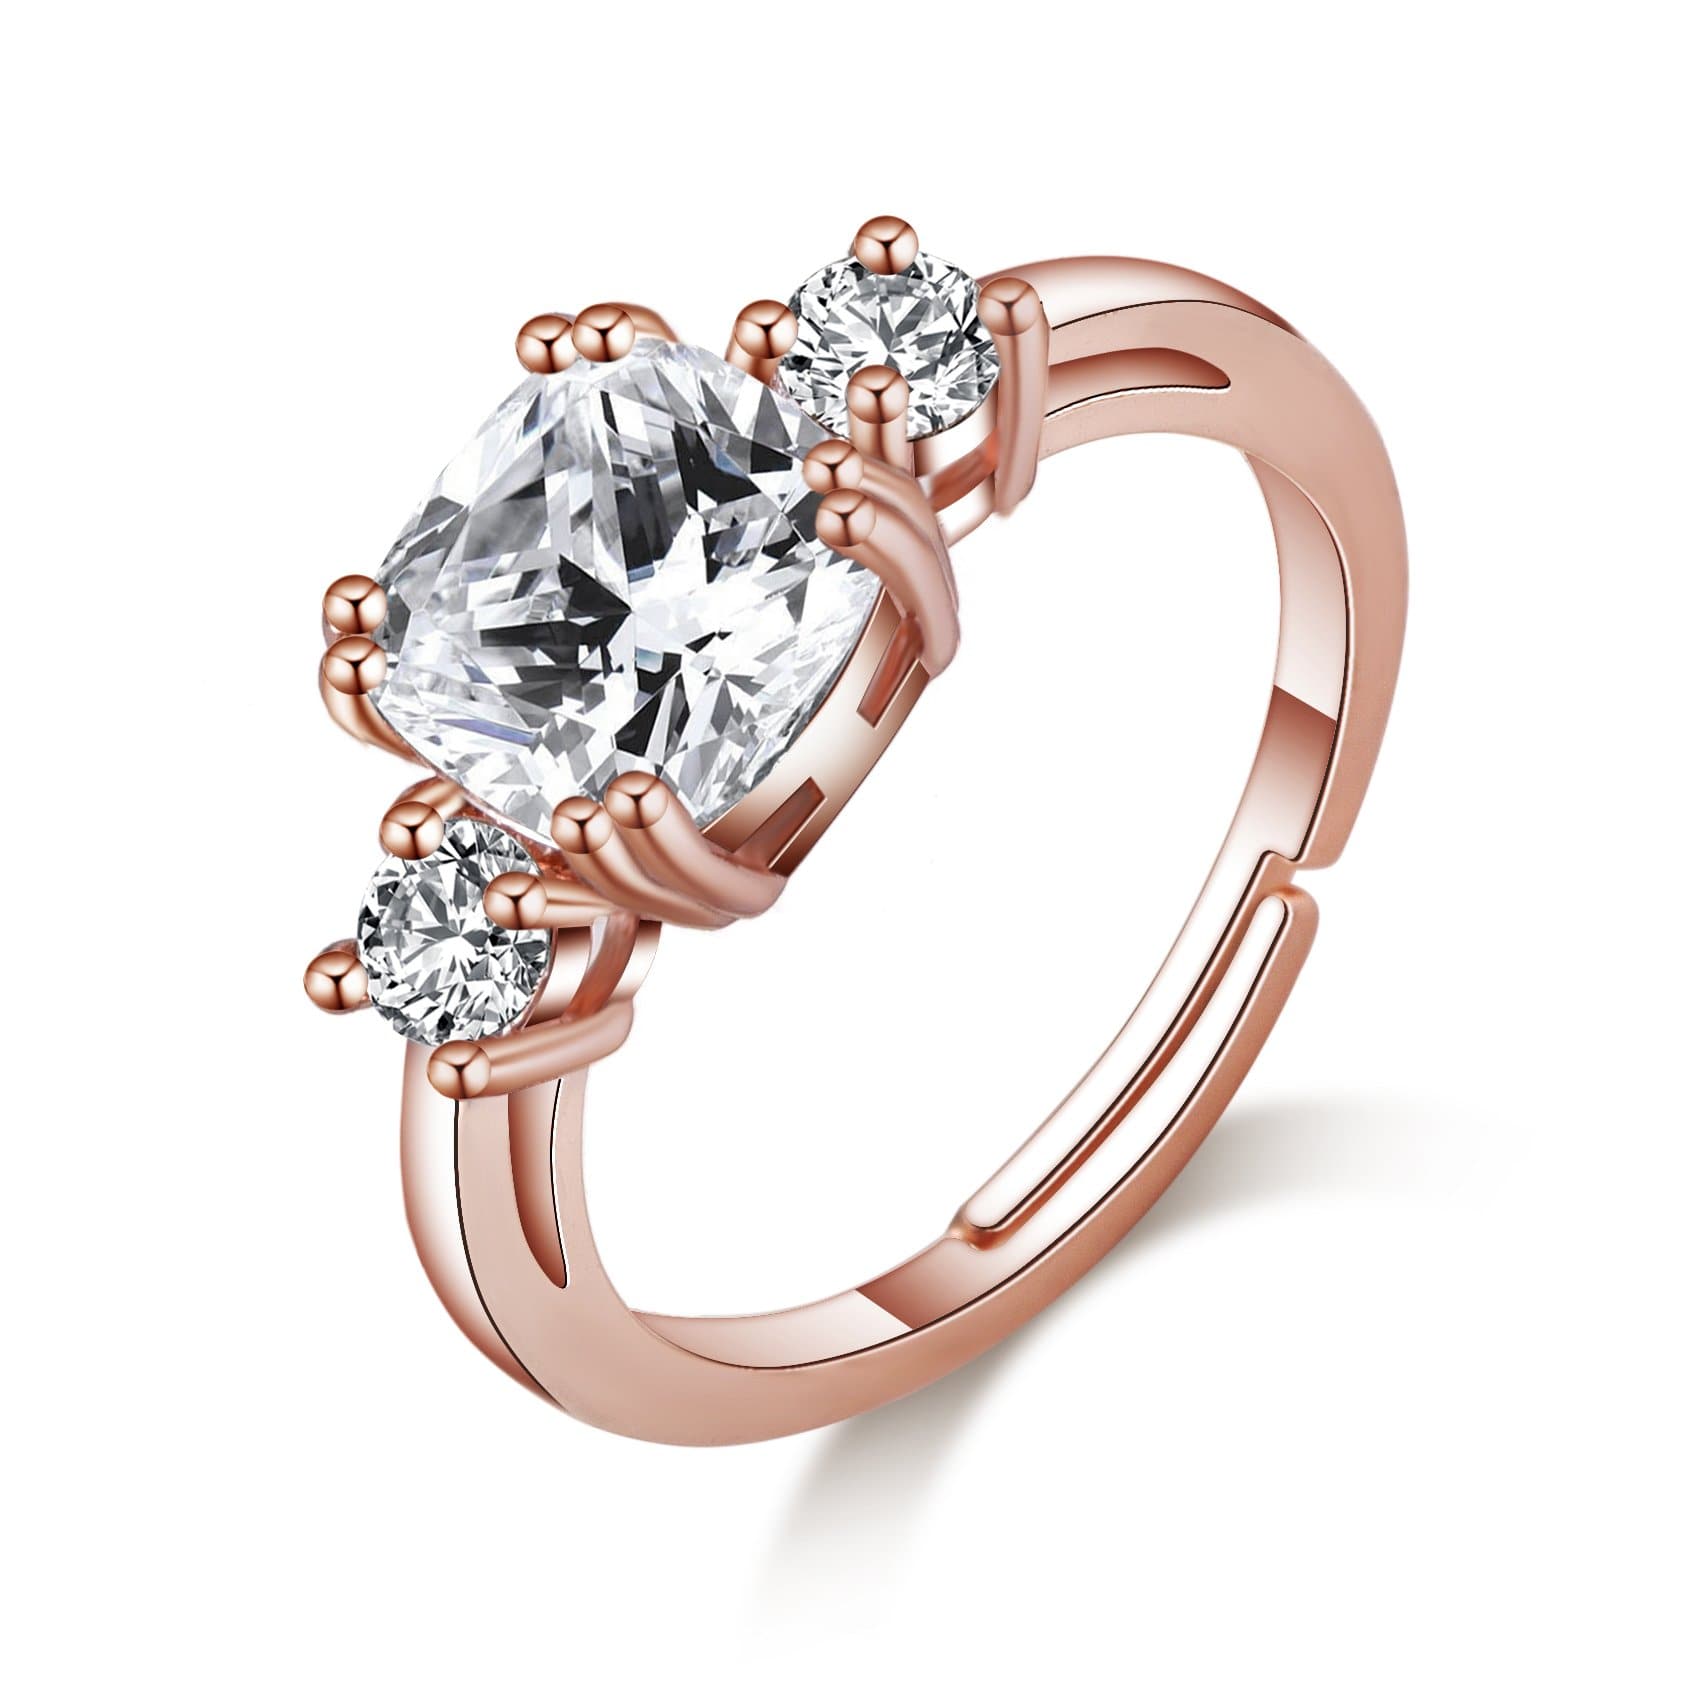 Rose Gold Plated Adjustable Three Stone Ring Created with Zircondia® Crystals by Philip Jones Jewellery